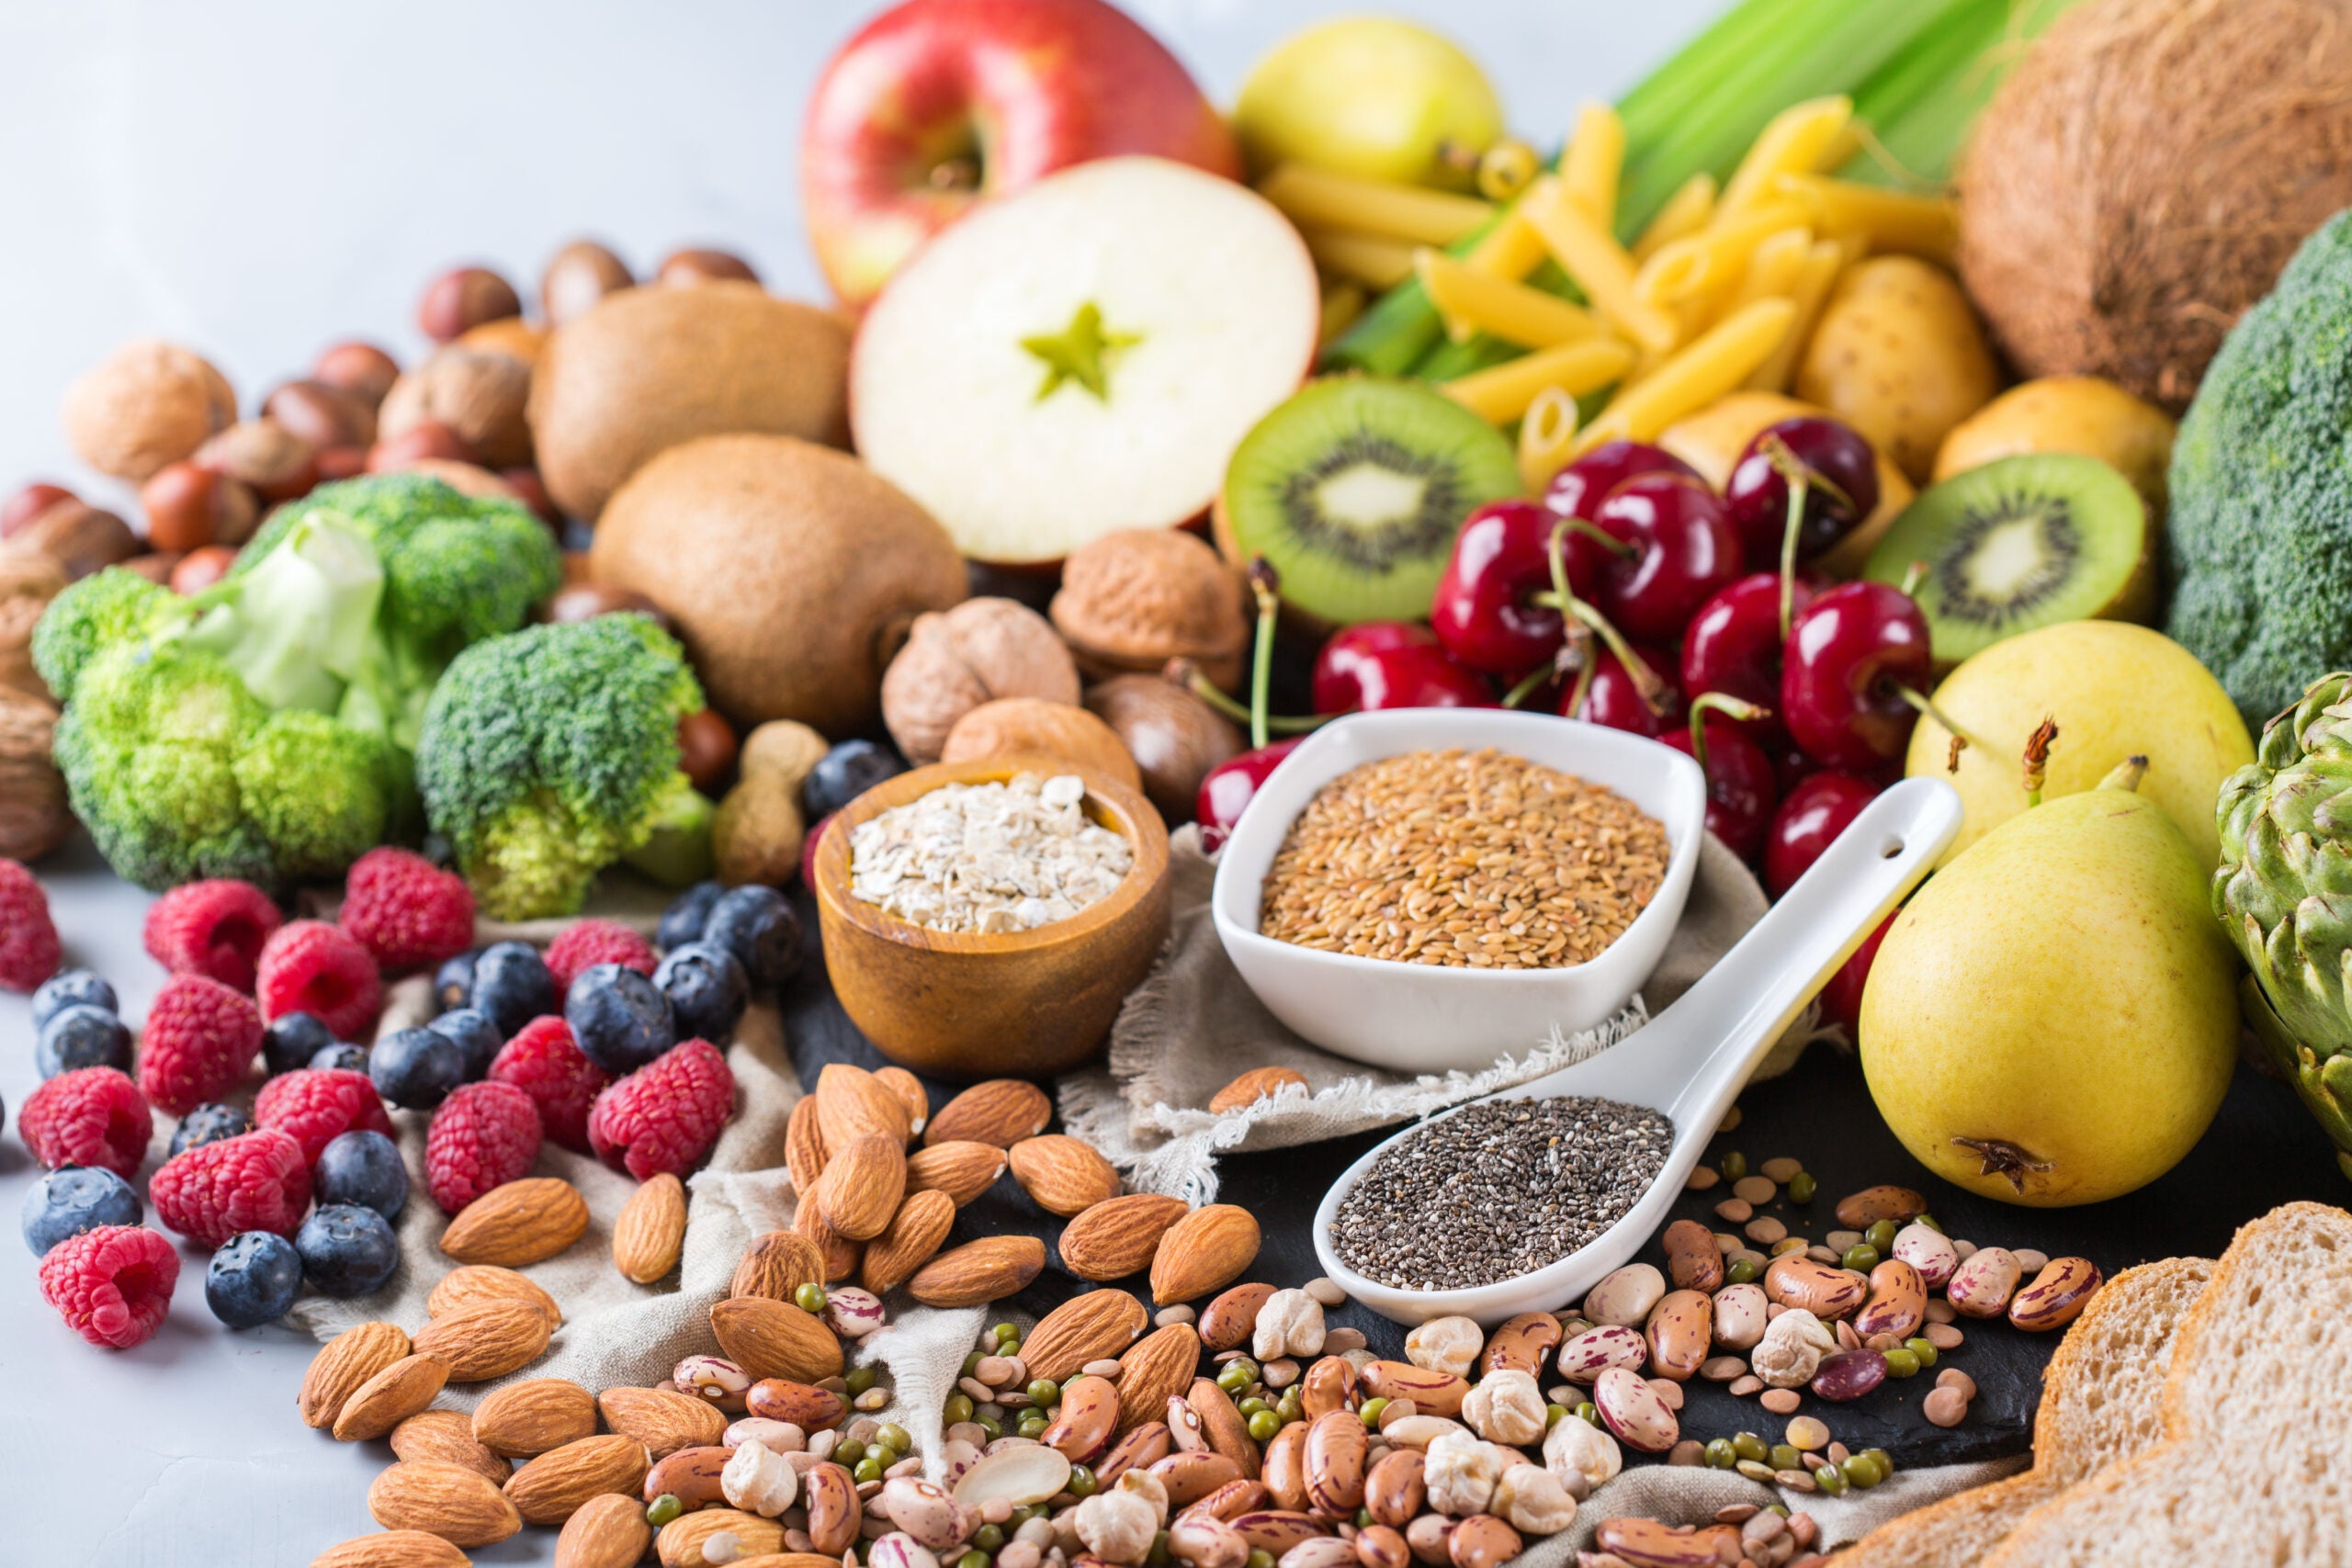 a variety of high fiber foods including berries, nuts, seeds, fruits, vegetables, and whole grains